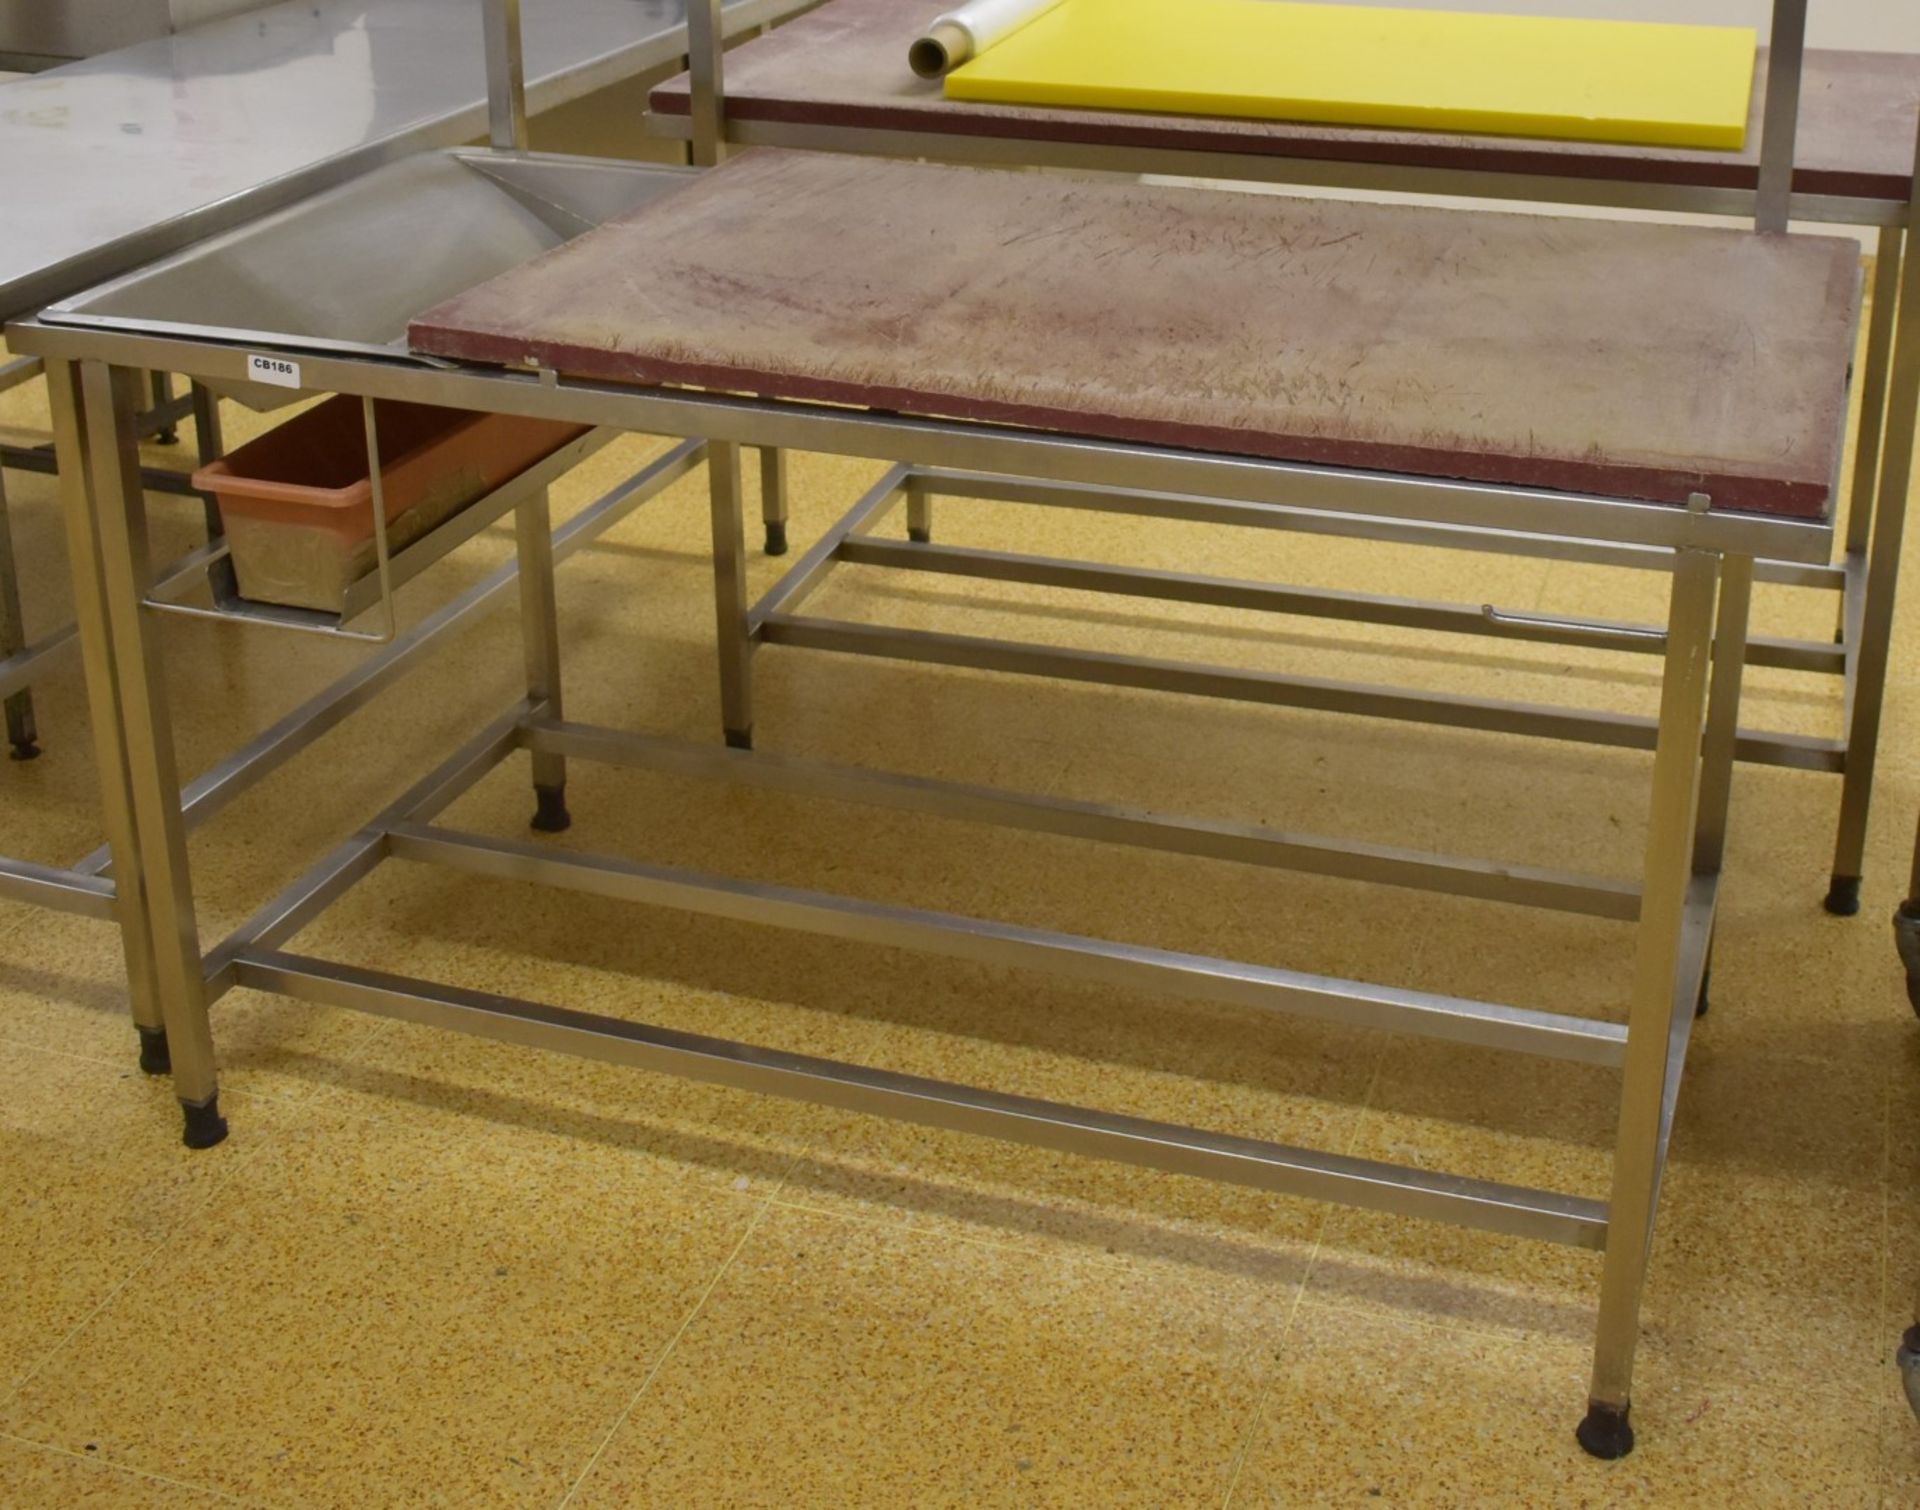 1 x Commercial Supermarket Butchers Prep Table - Stainless Steel Bench With Chopping Board, Drip - Image 6 of 6